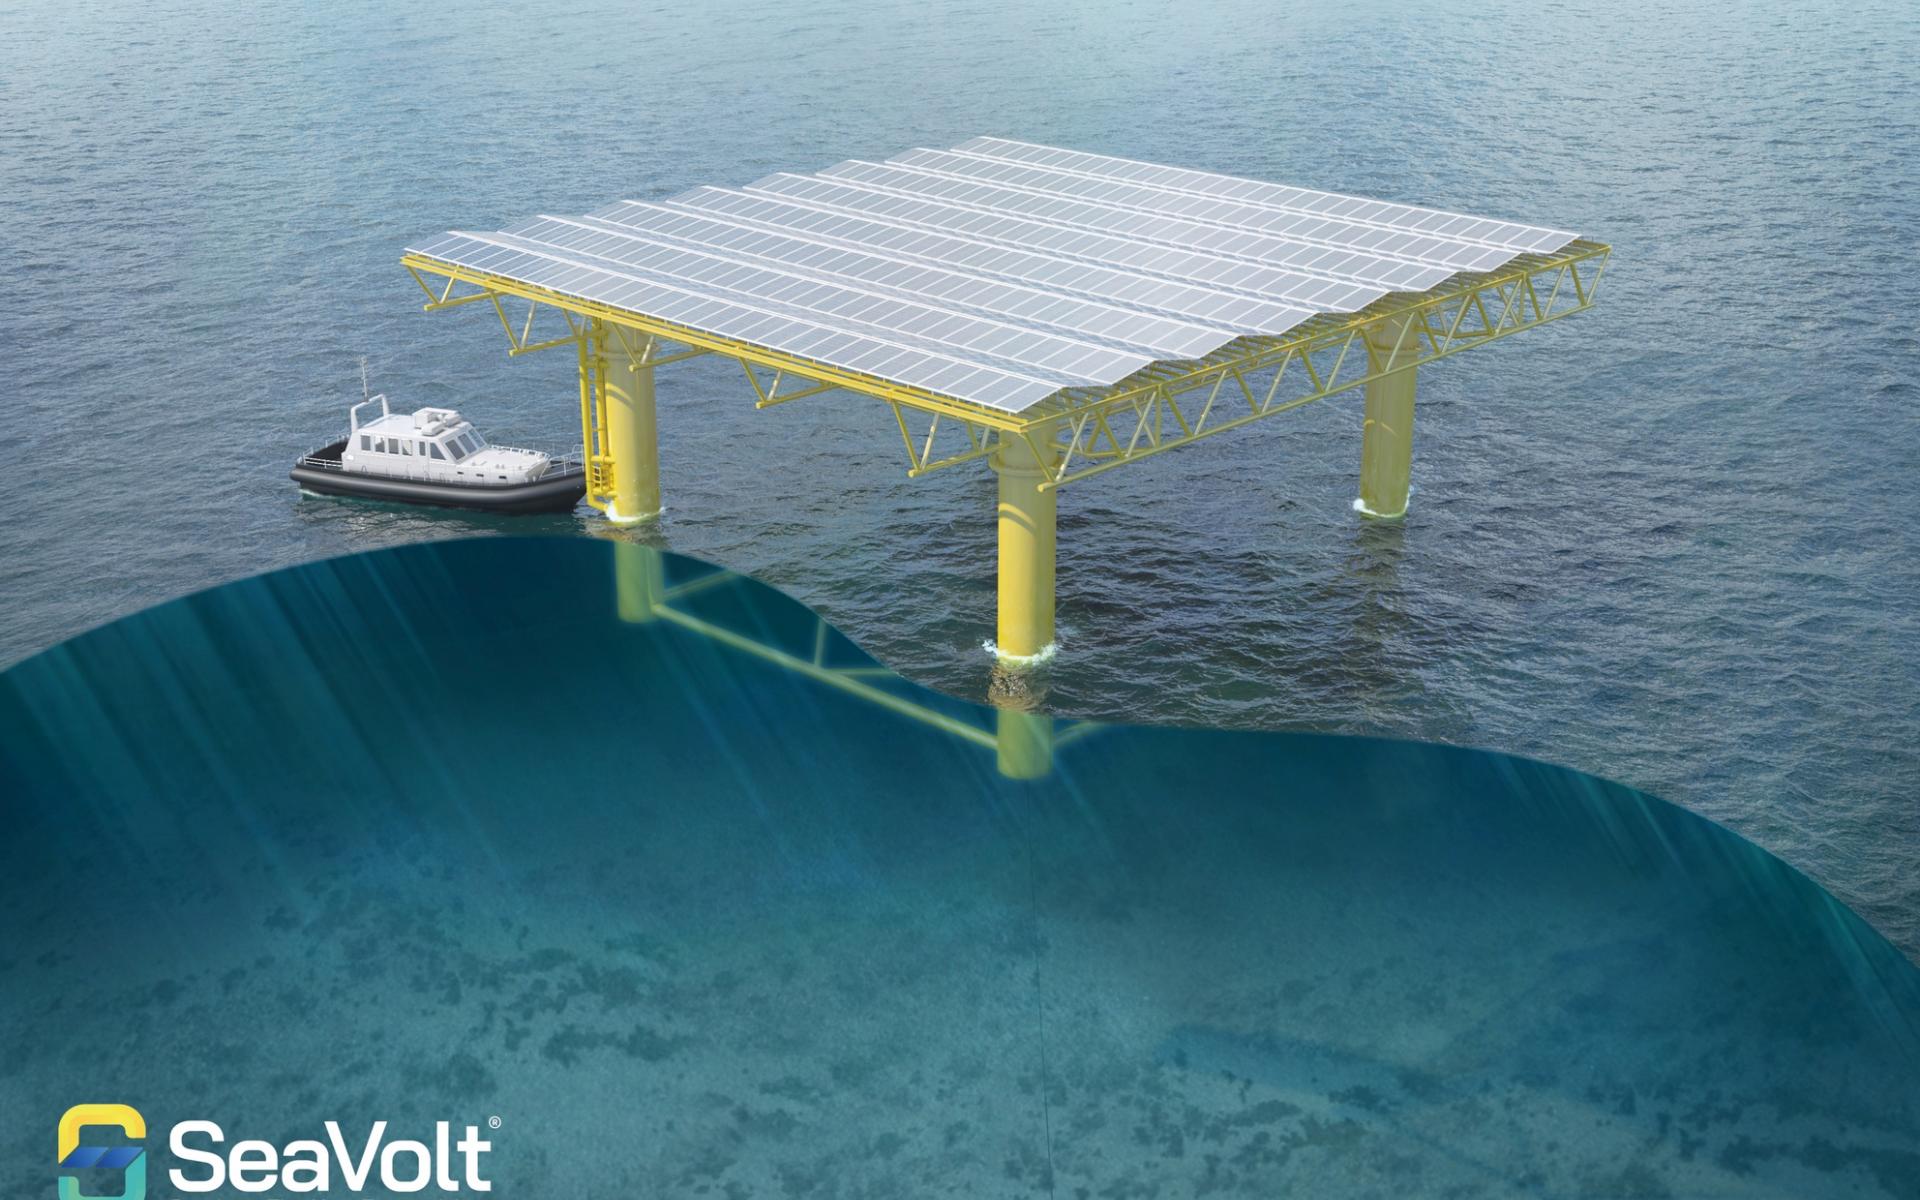 The test platform will be a floating laboratory